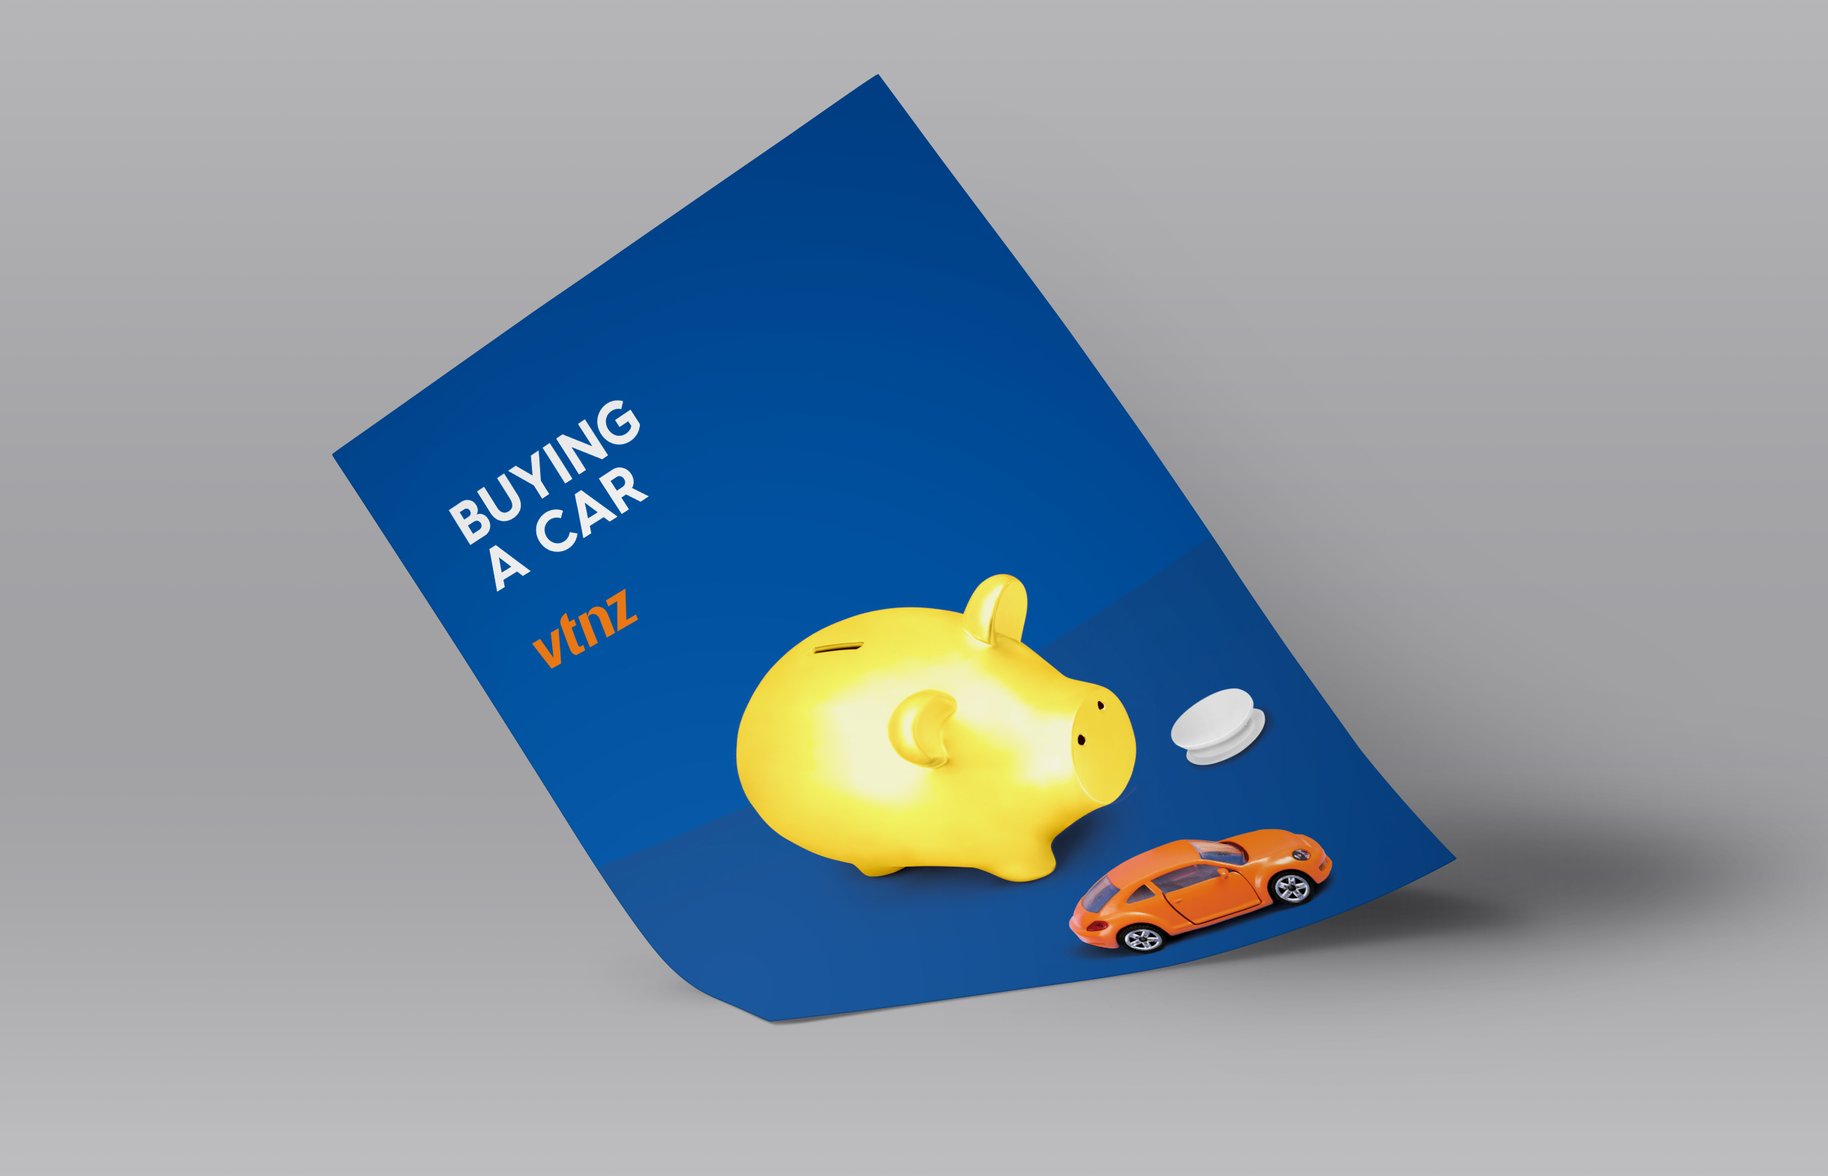 VTNZ 'Buying a car' Poster